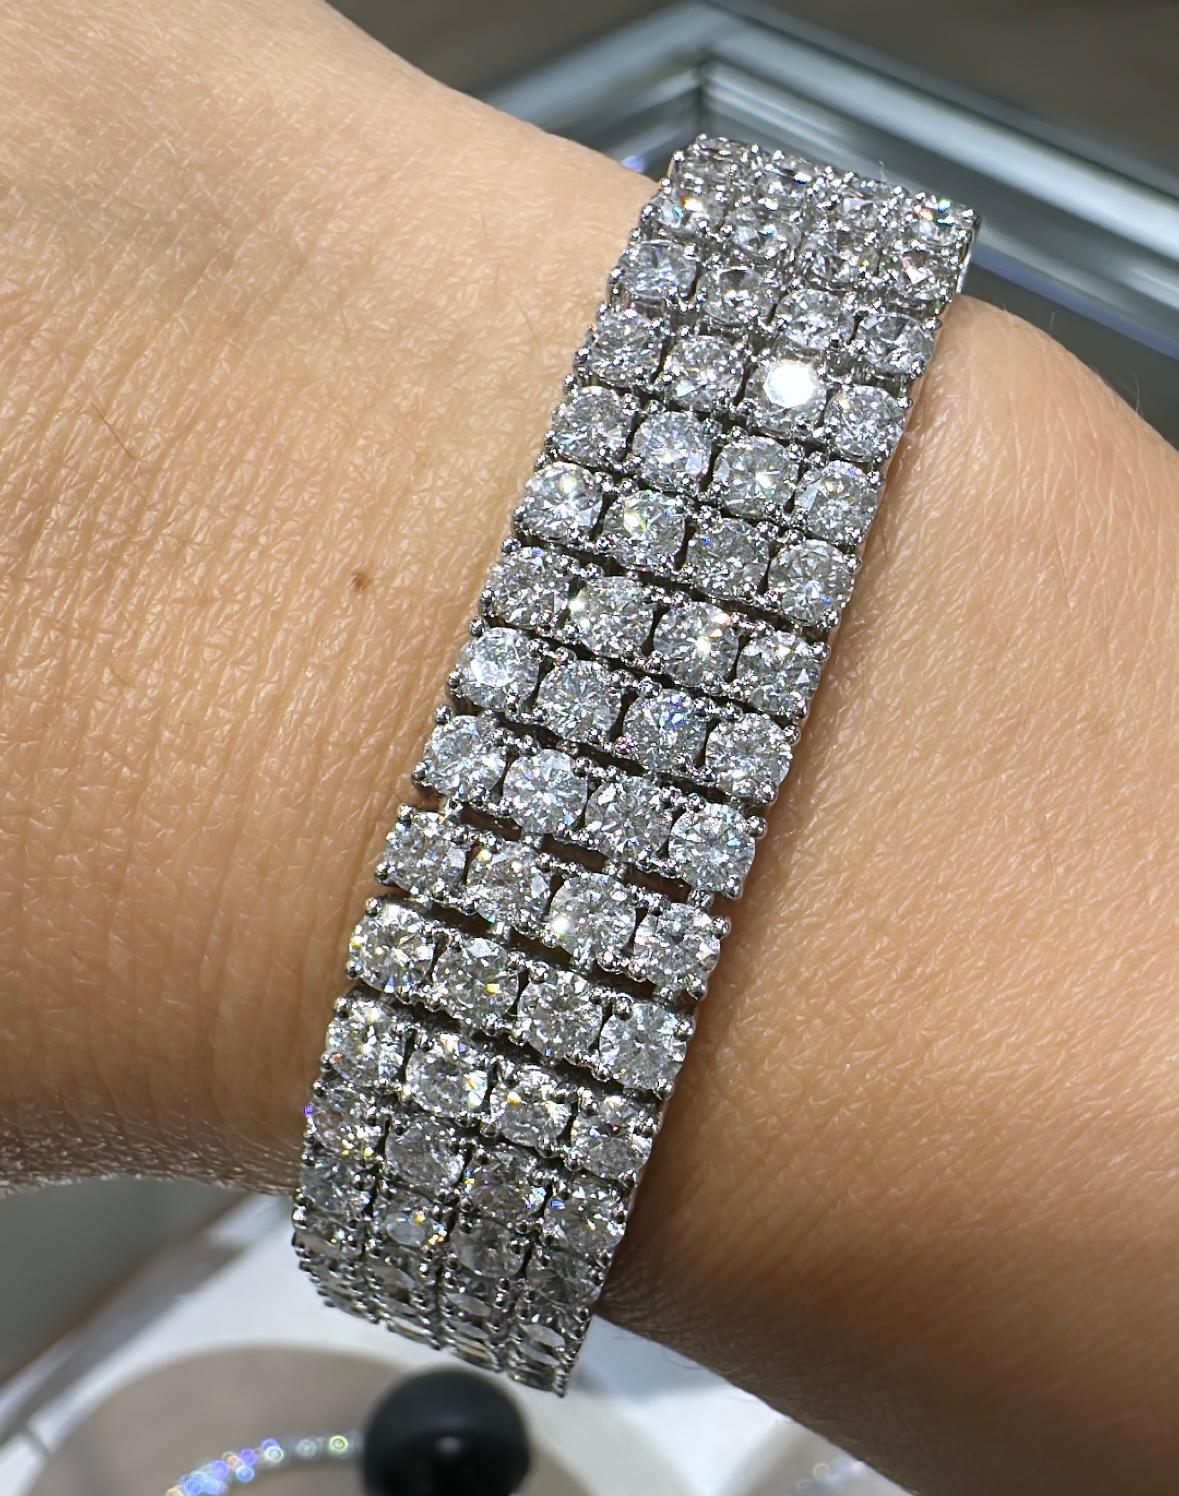 SKU: 103106
Dramatic 26.65 carat white diamond bangle bracelet sure to add shimmer and shine. With 200 total number of round diamonds your wrist will shine with every move that you make. Bracelet width: 13.3mm and fits a 3 inch wrist
Metal: 18k